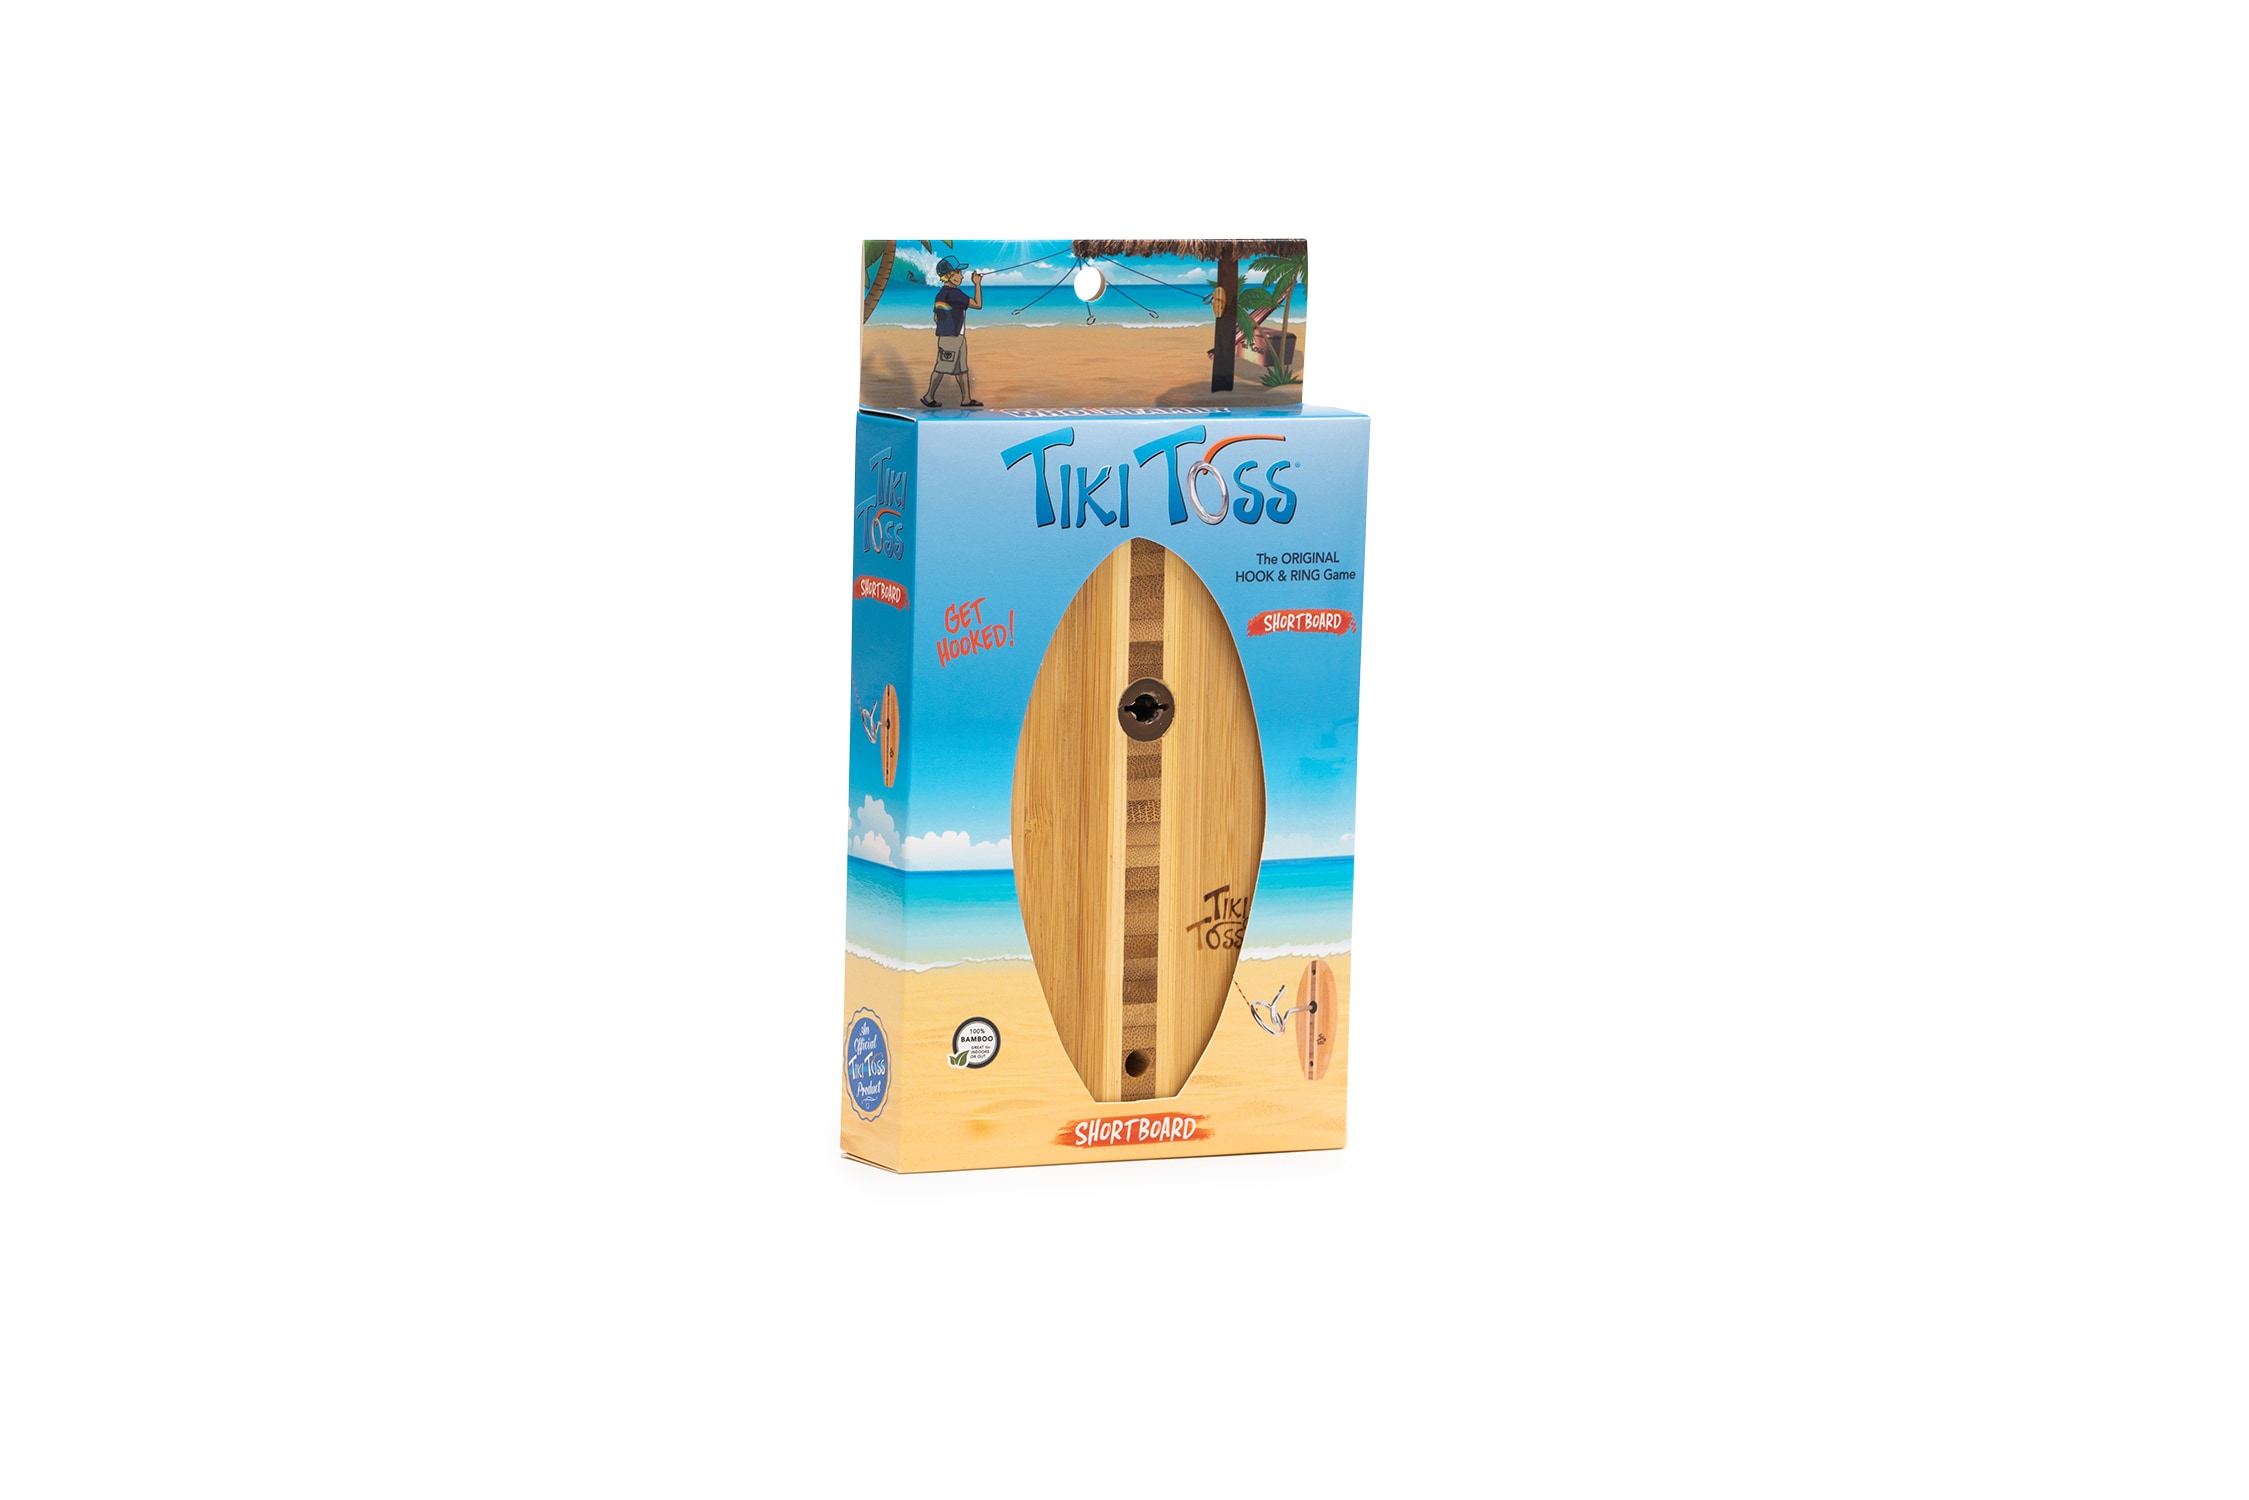 Tiki Toss Original Hook and Ring Game 100 Bamboo Deluxe Edition Read for sale online 